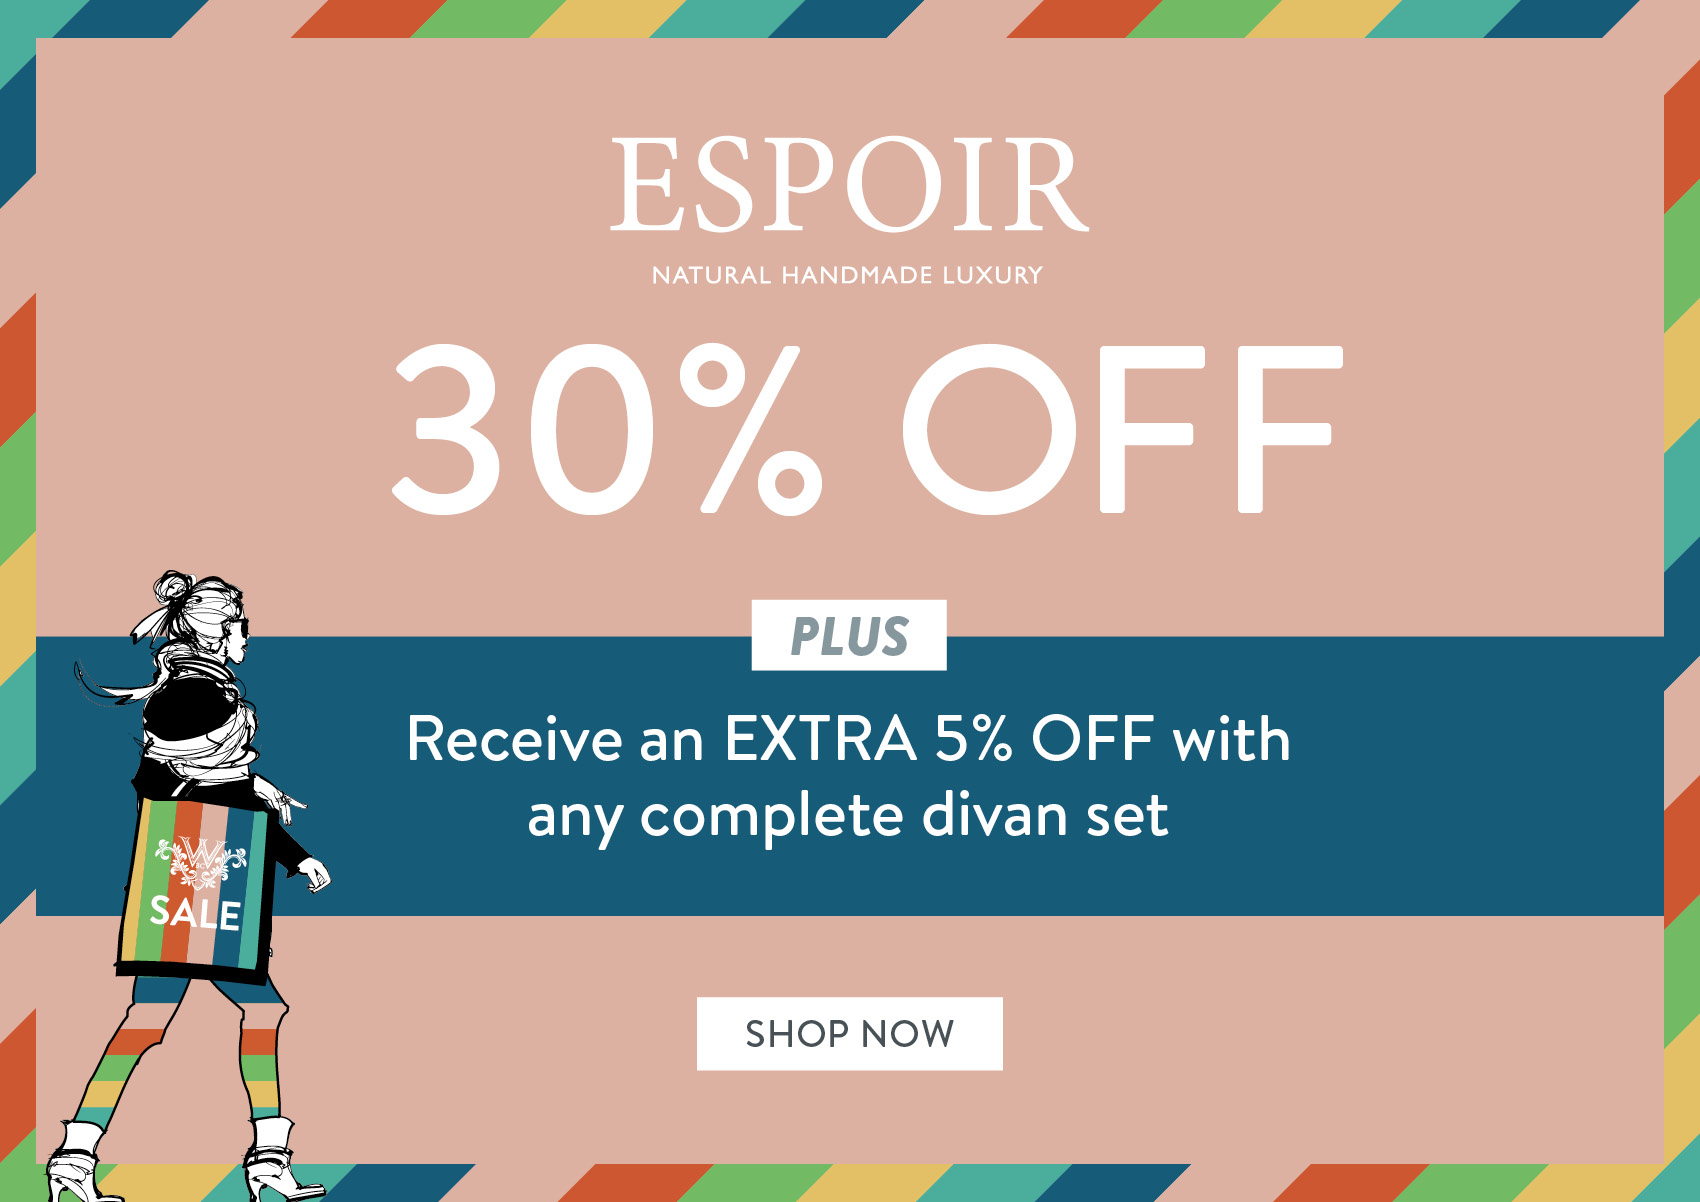 ESPOIR - Natural Handmade Luxury - 30% OFF PLUS Receive an EXTRA 5% OFF with any complete divan set - SHOP NOW